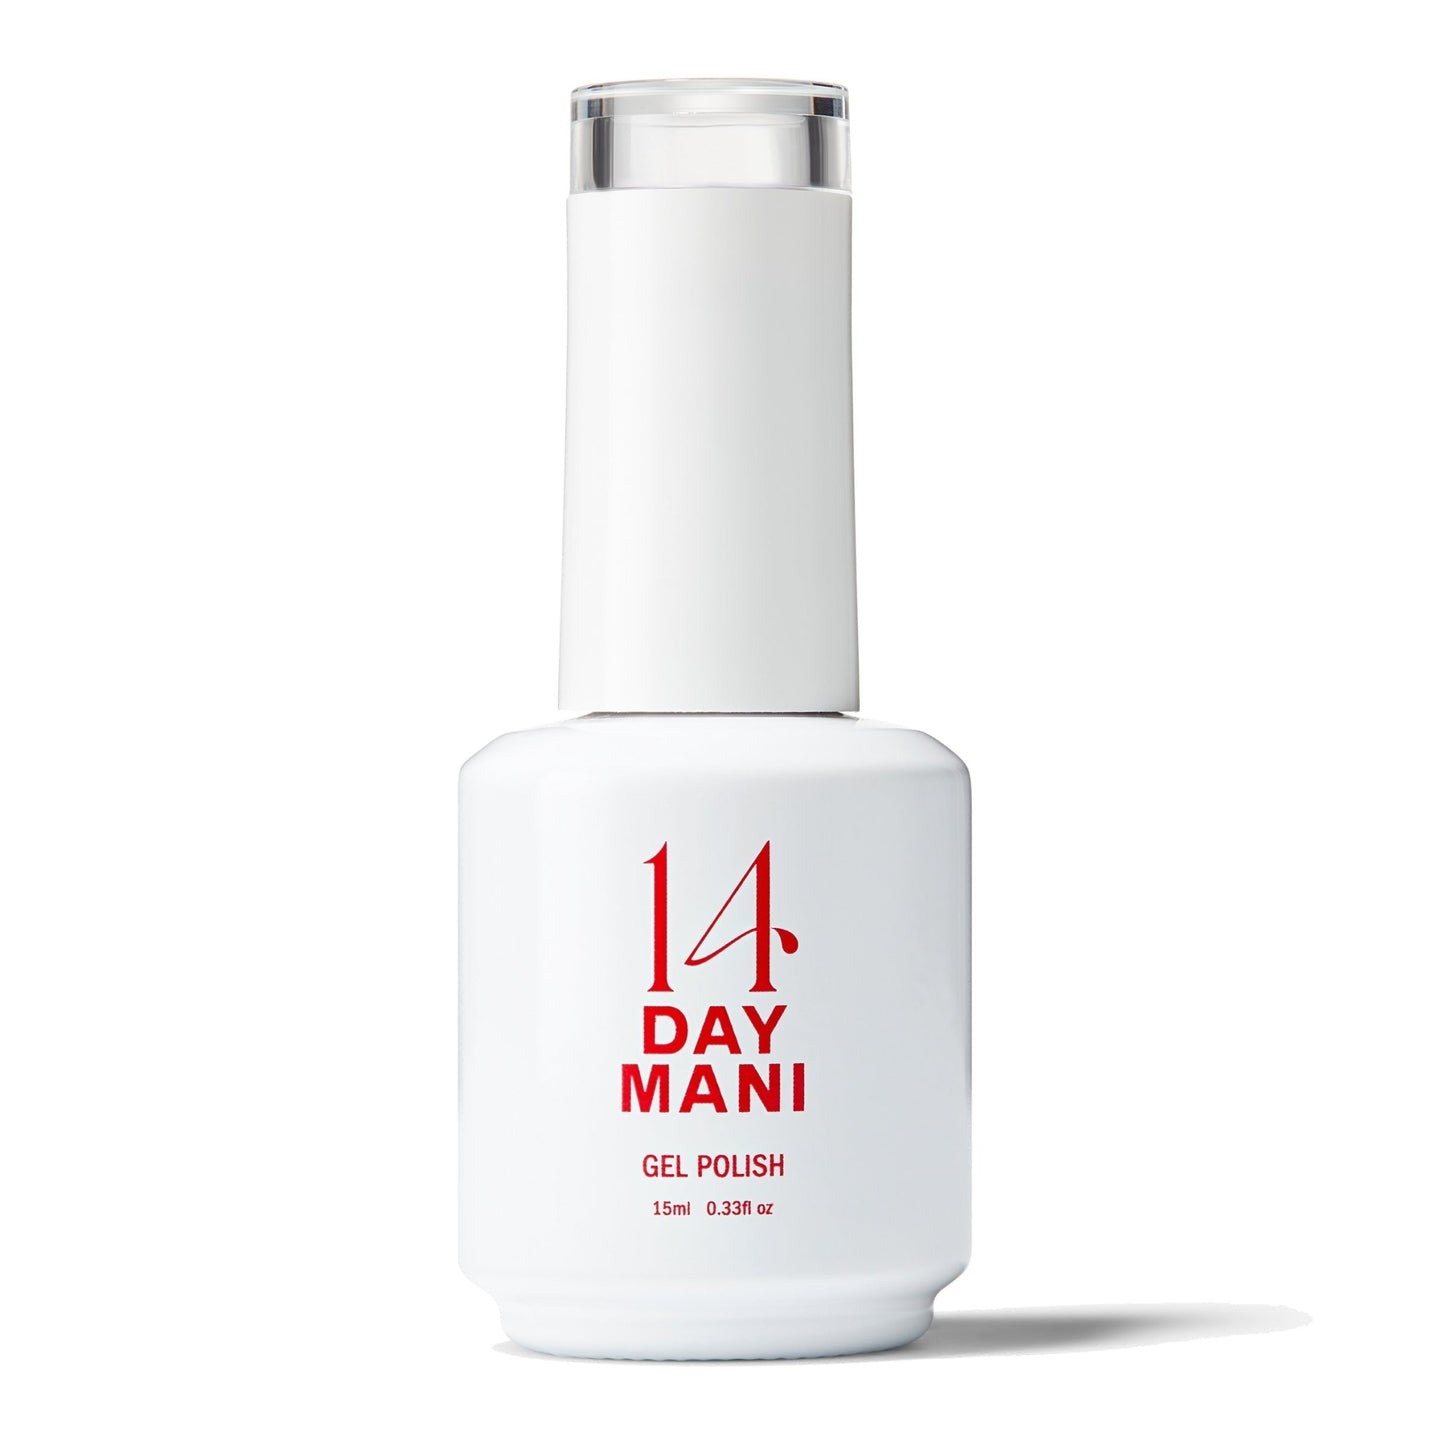 All You Need is Love - Gel Polish - 14 Day Manicure - Bottle 